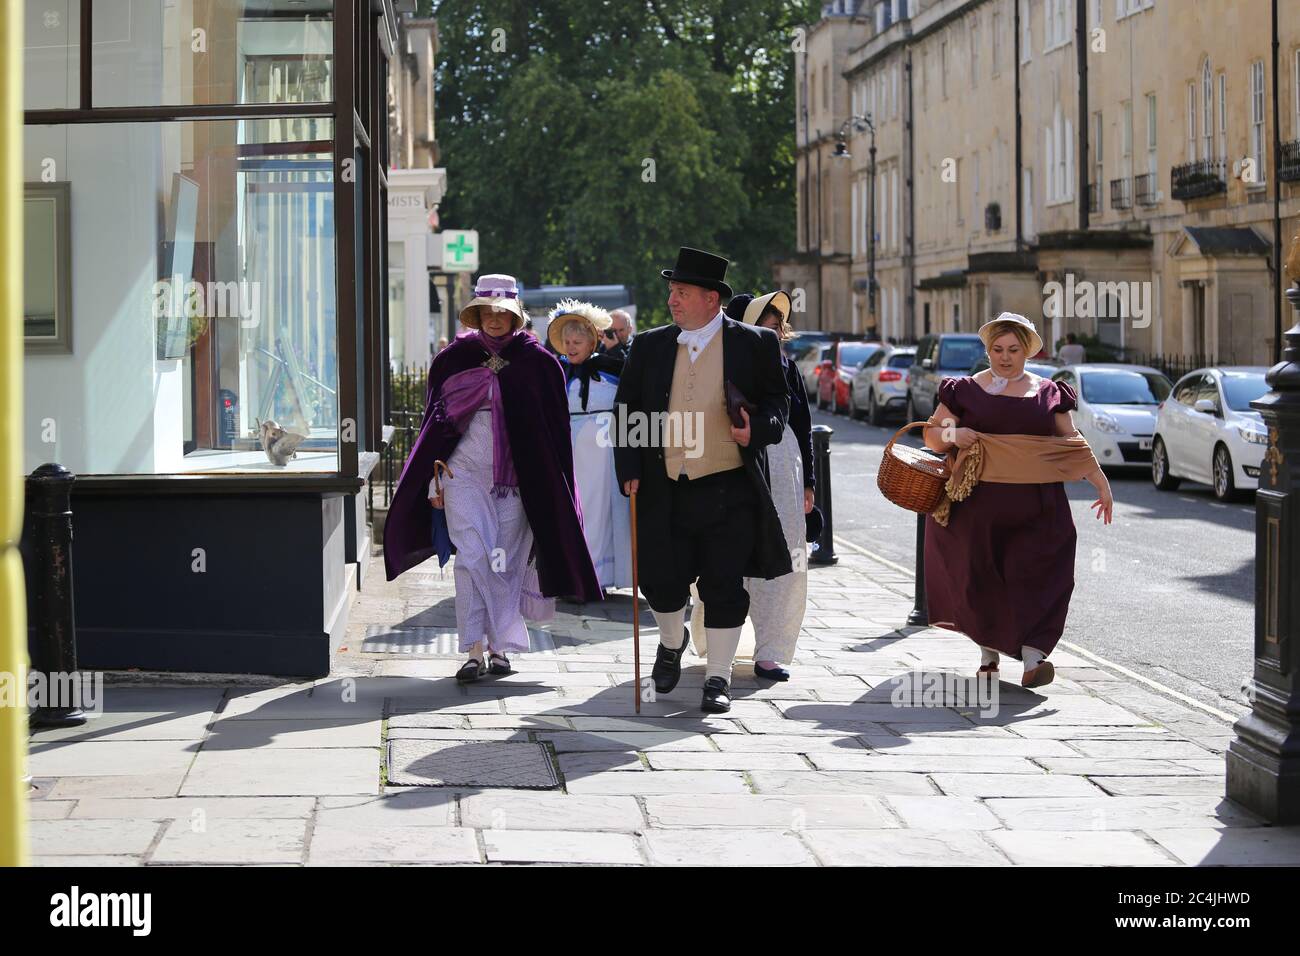 Vintage style dressed people walking at the Regency Costumed Promenade,the 200th anniversary of Jane Austen's death in Bath,England,UK,09/09/2017 Stock Photo